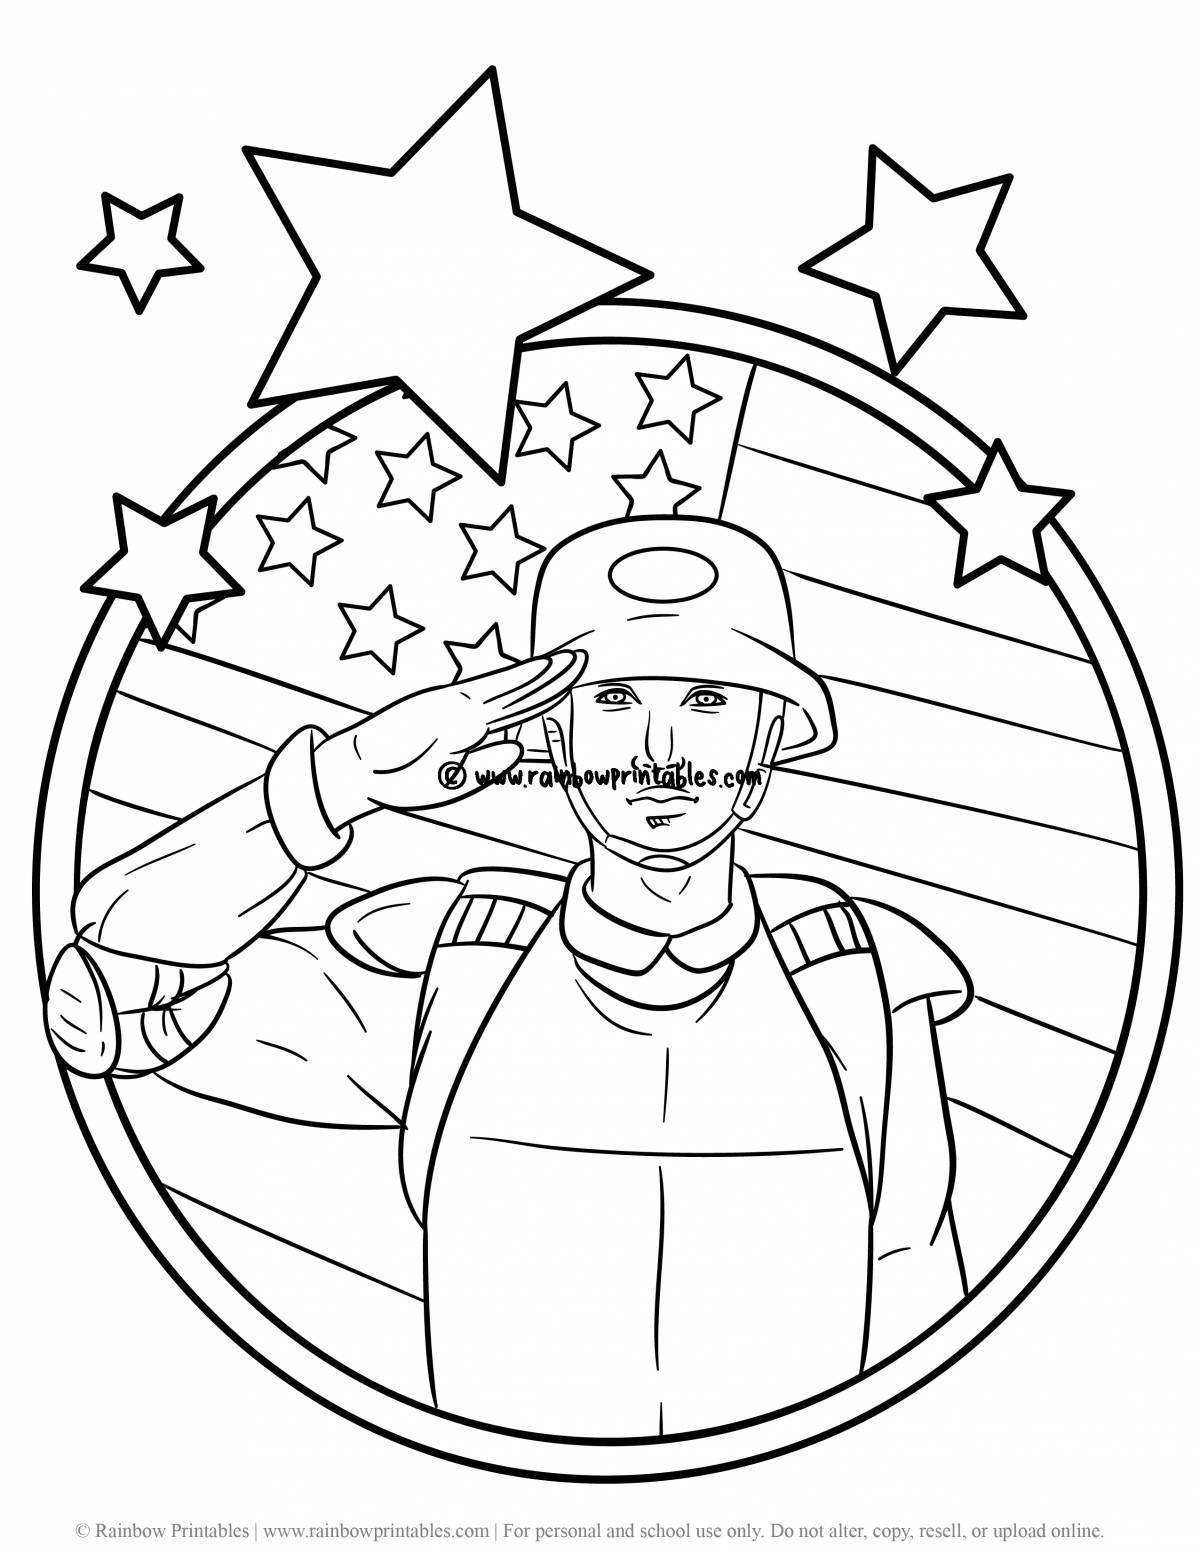 Coloring book brave soldier for kids